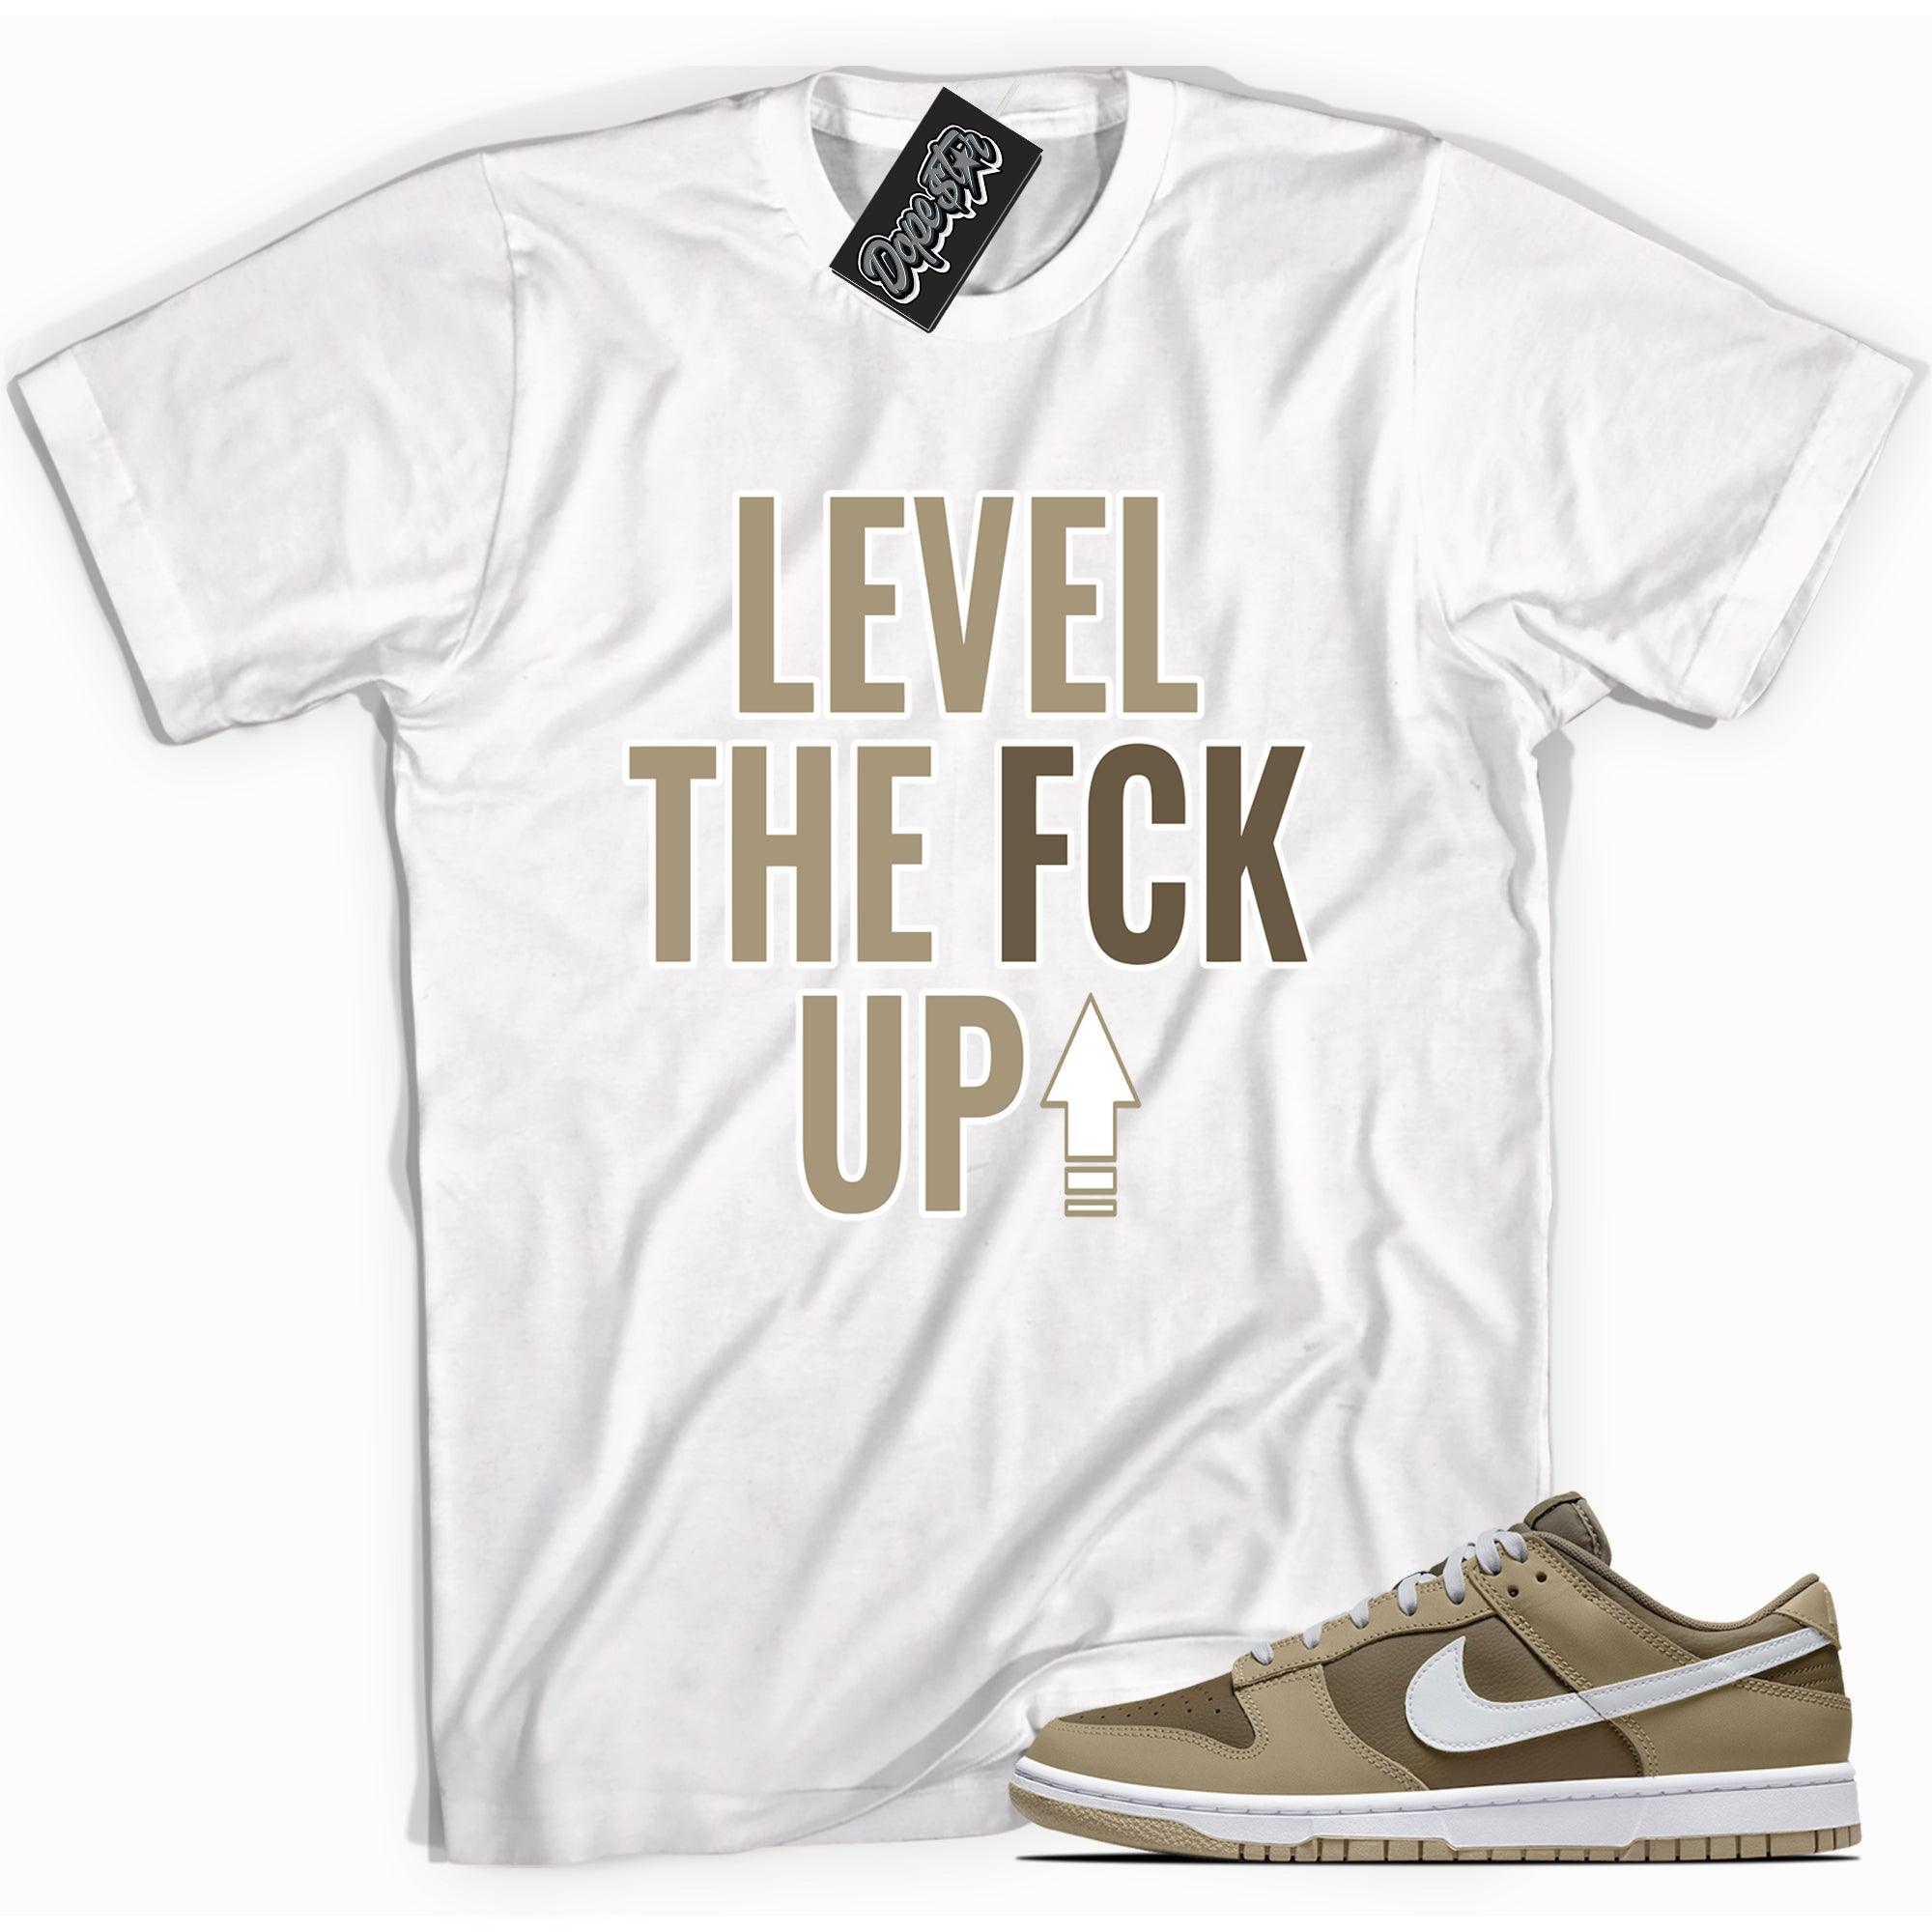 Cool white graphic tee with 'Level Up' print, that perfectly matches Nike Dunk Low Judge Grey sneakers.